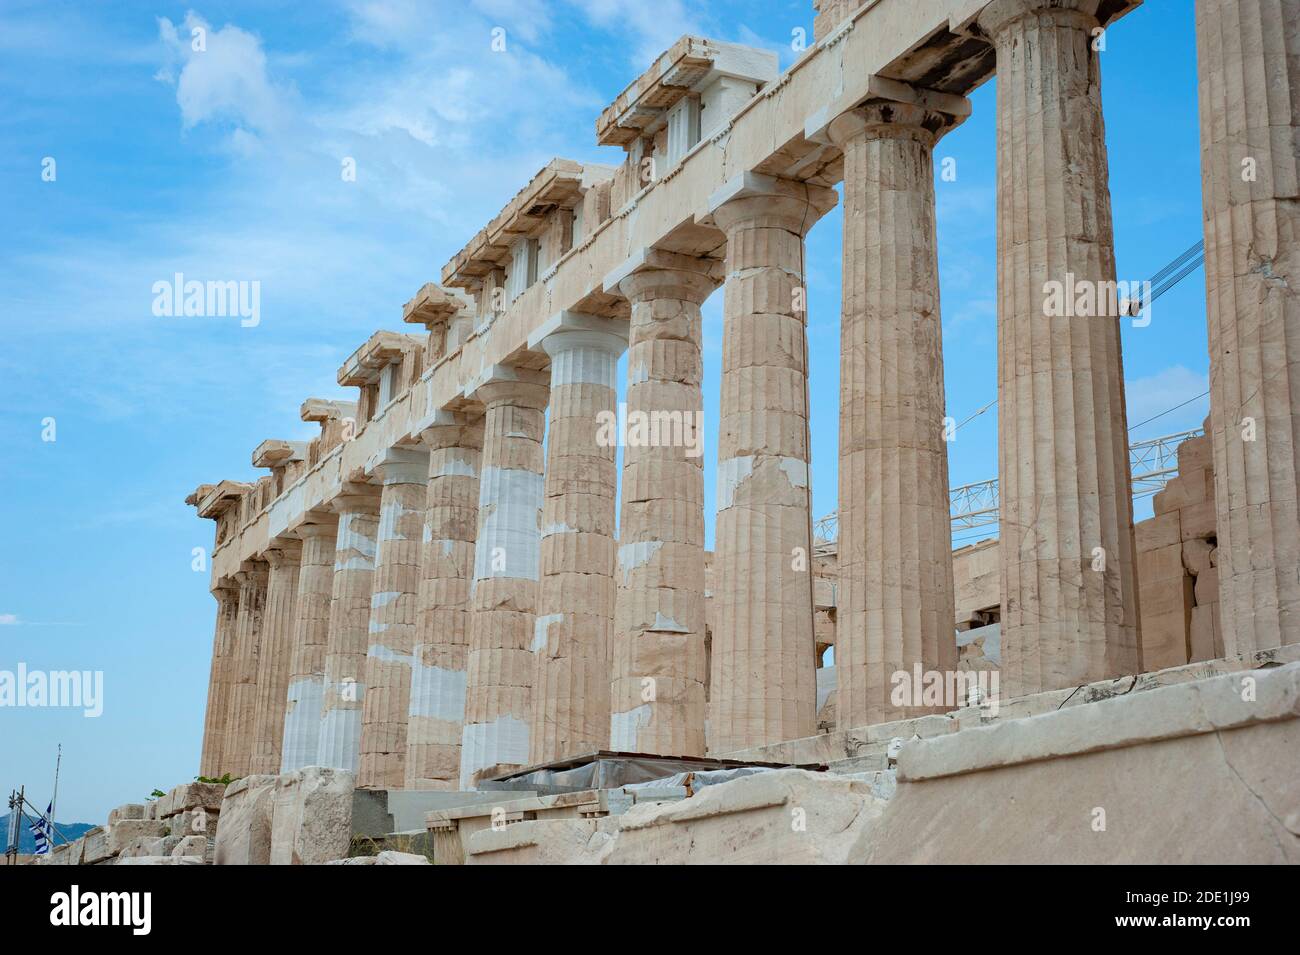 Columns of the Parthenon temple against the sky, Athens, Greece Stock Photo